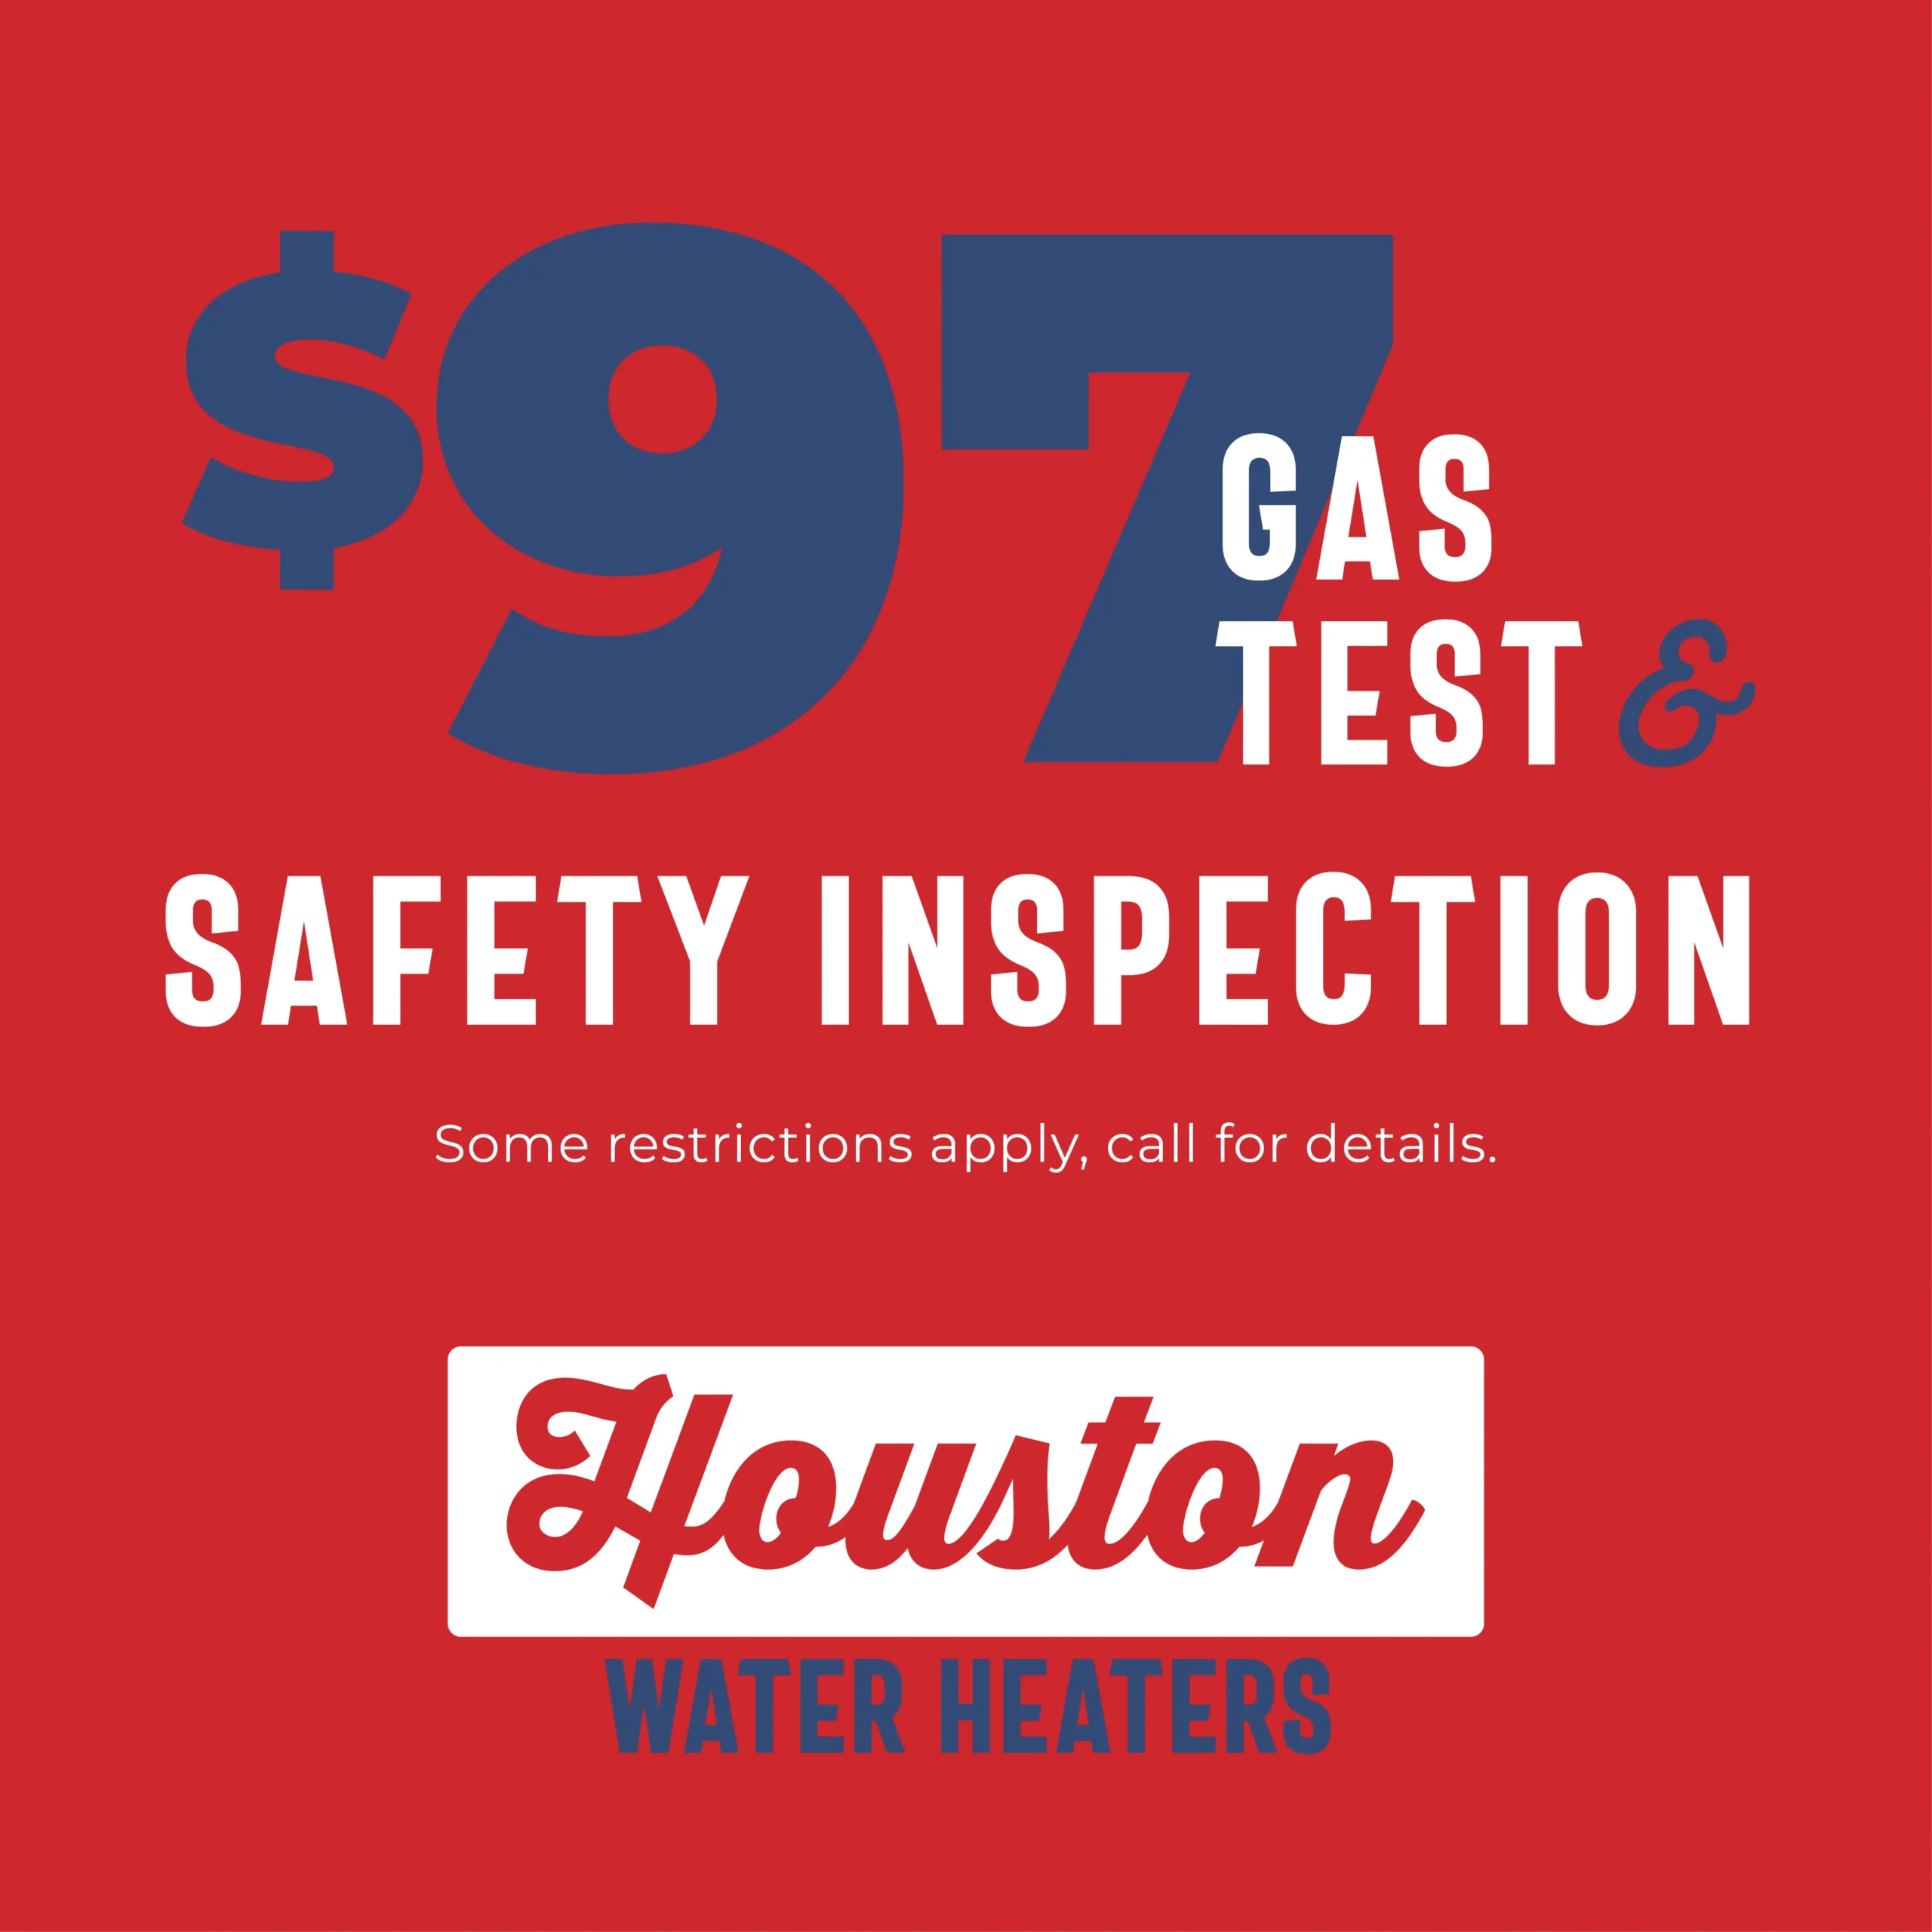 $97 Gas Test & Safety Inspection